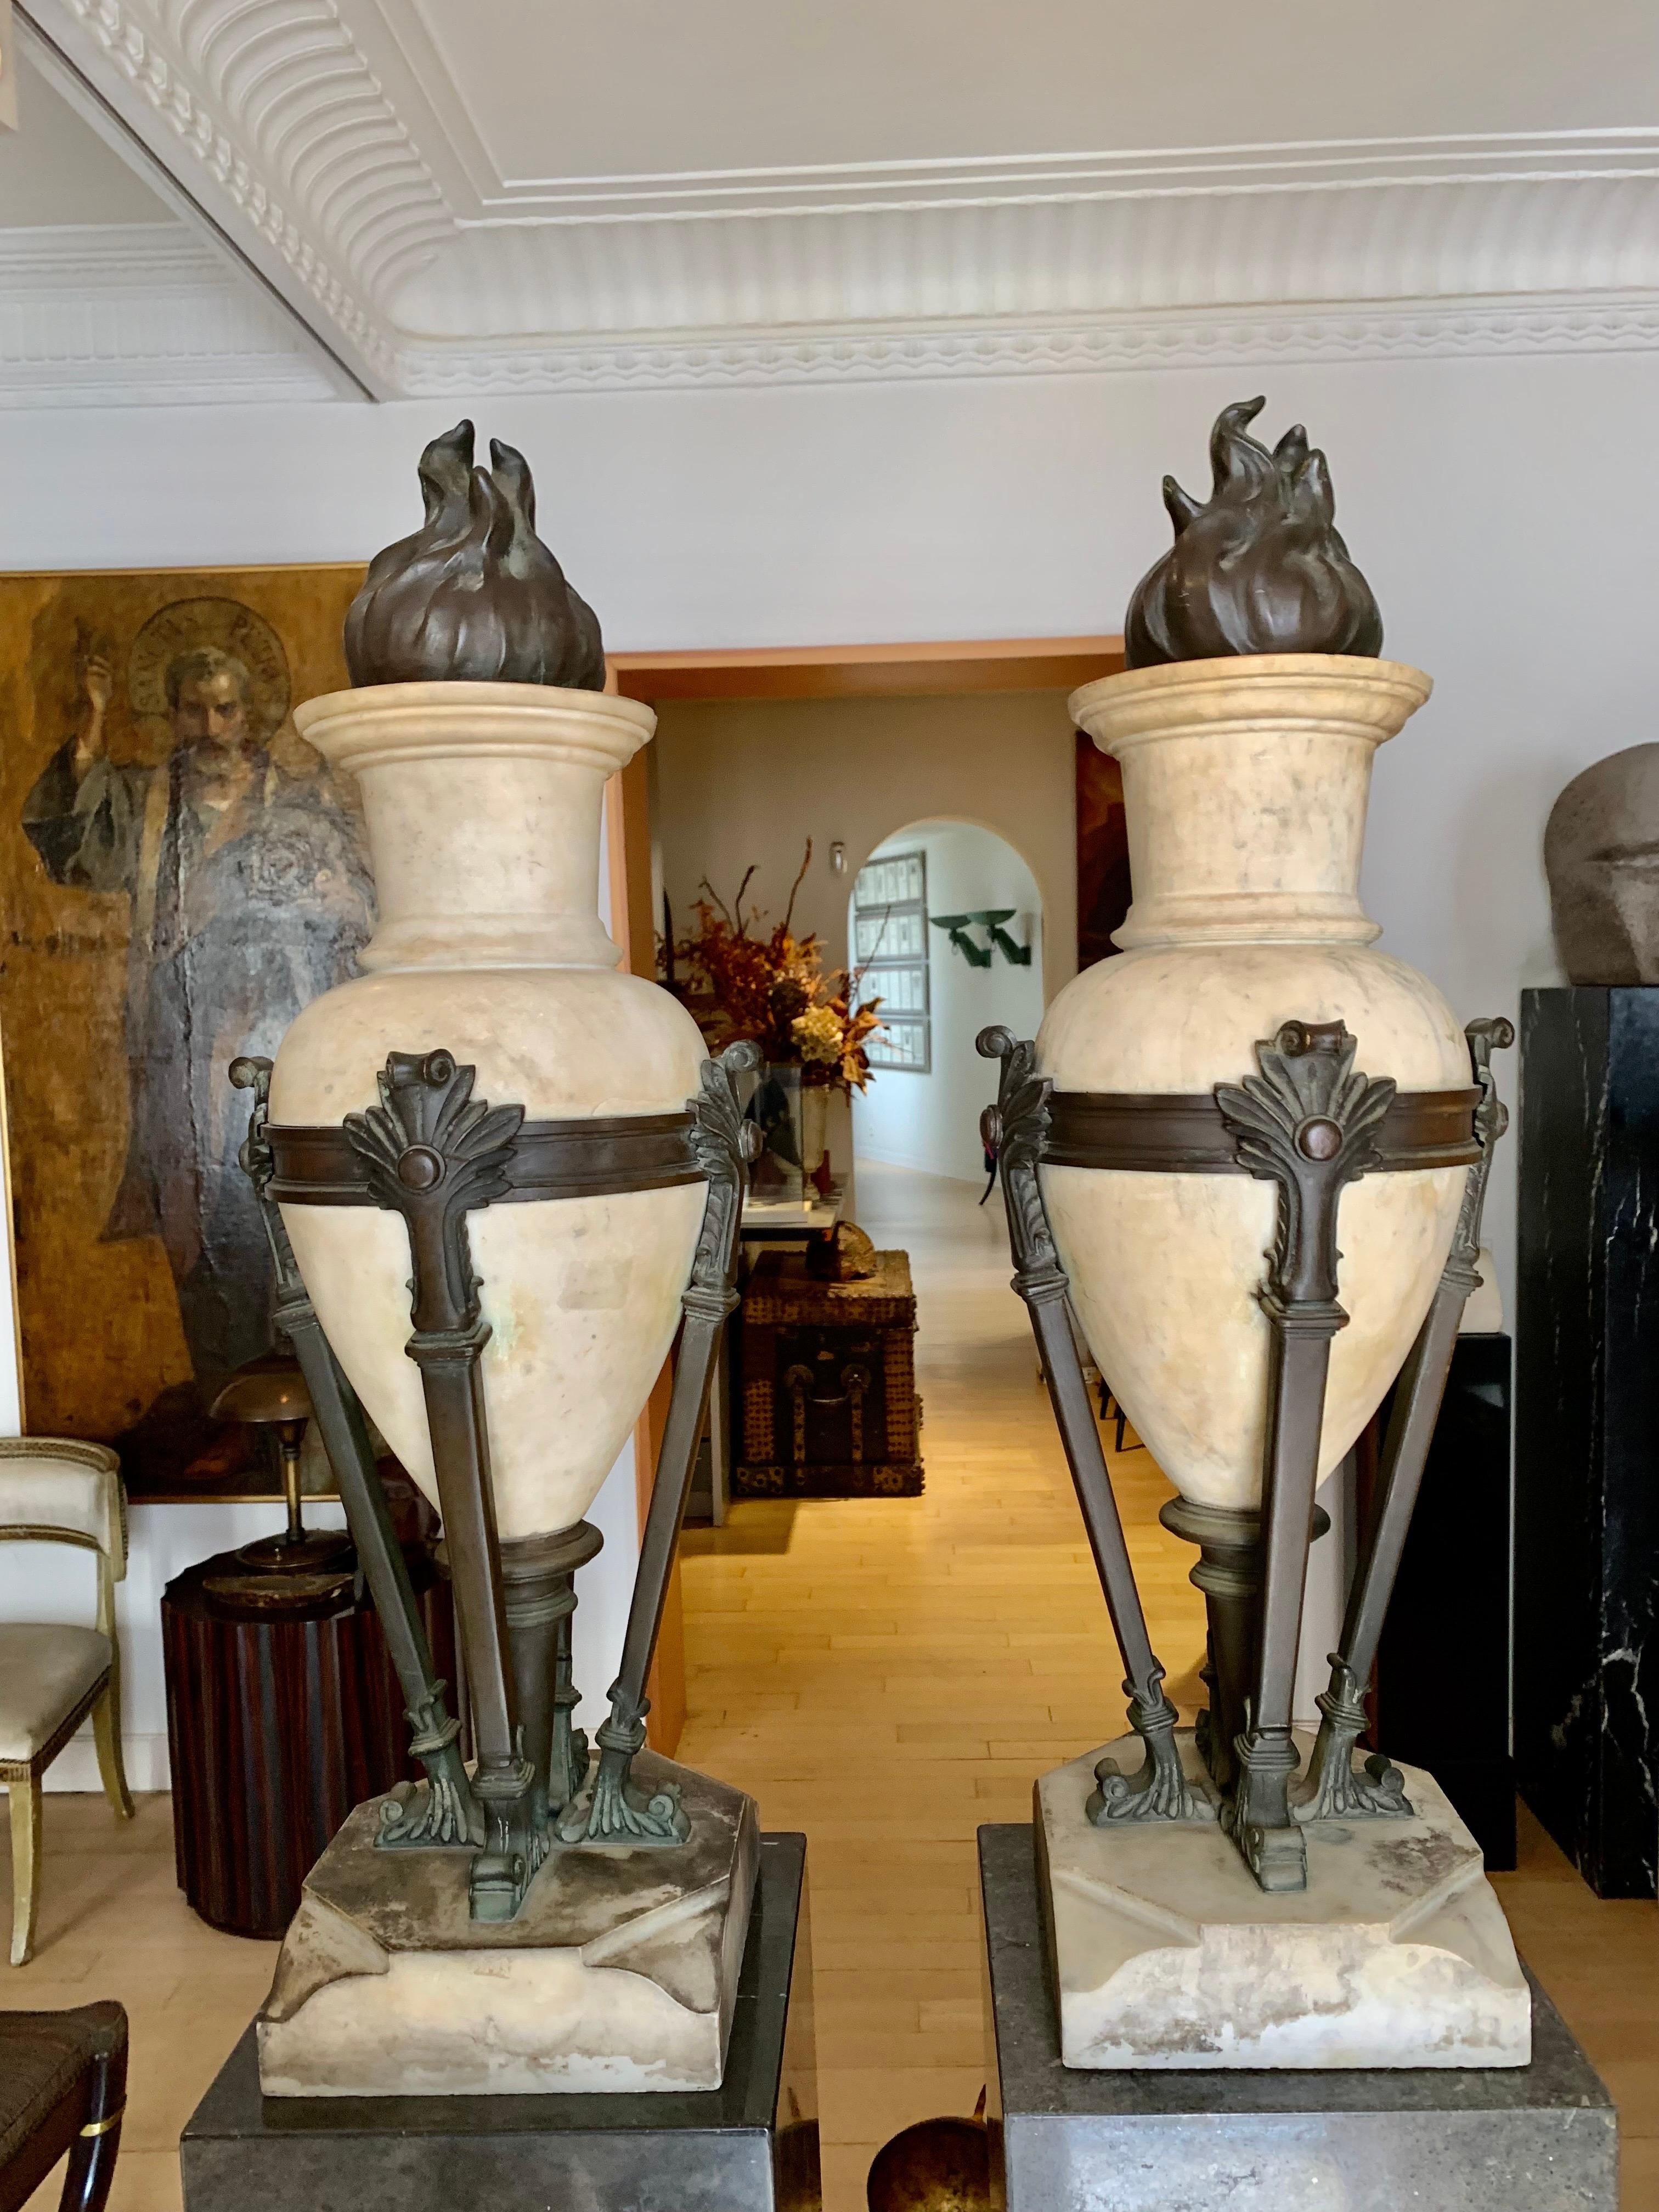 A pair of impressive and large vases or urns from the Art Deco period, made of white marble and patinated bronze, the cups in the shape of an amphora or Greco-Roman vessel, are supported by a circular bronze structure, from which four legs emerge on